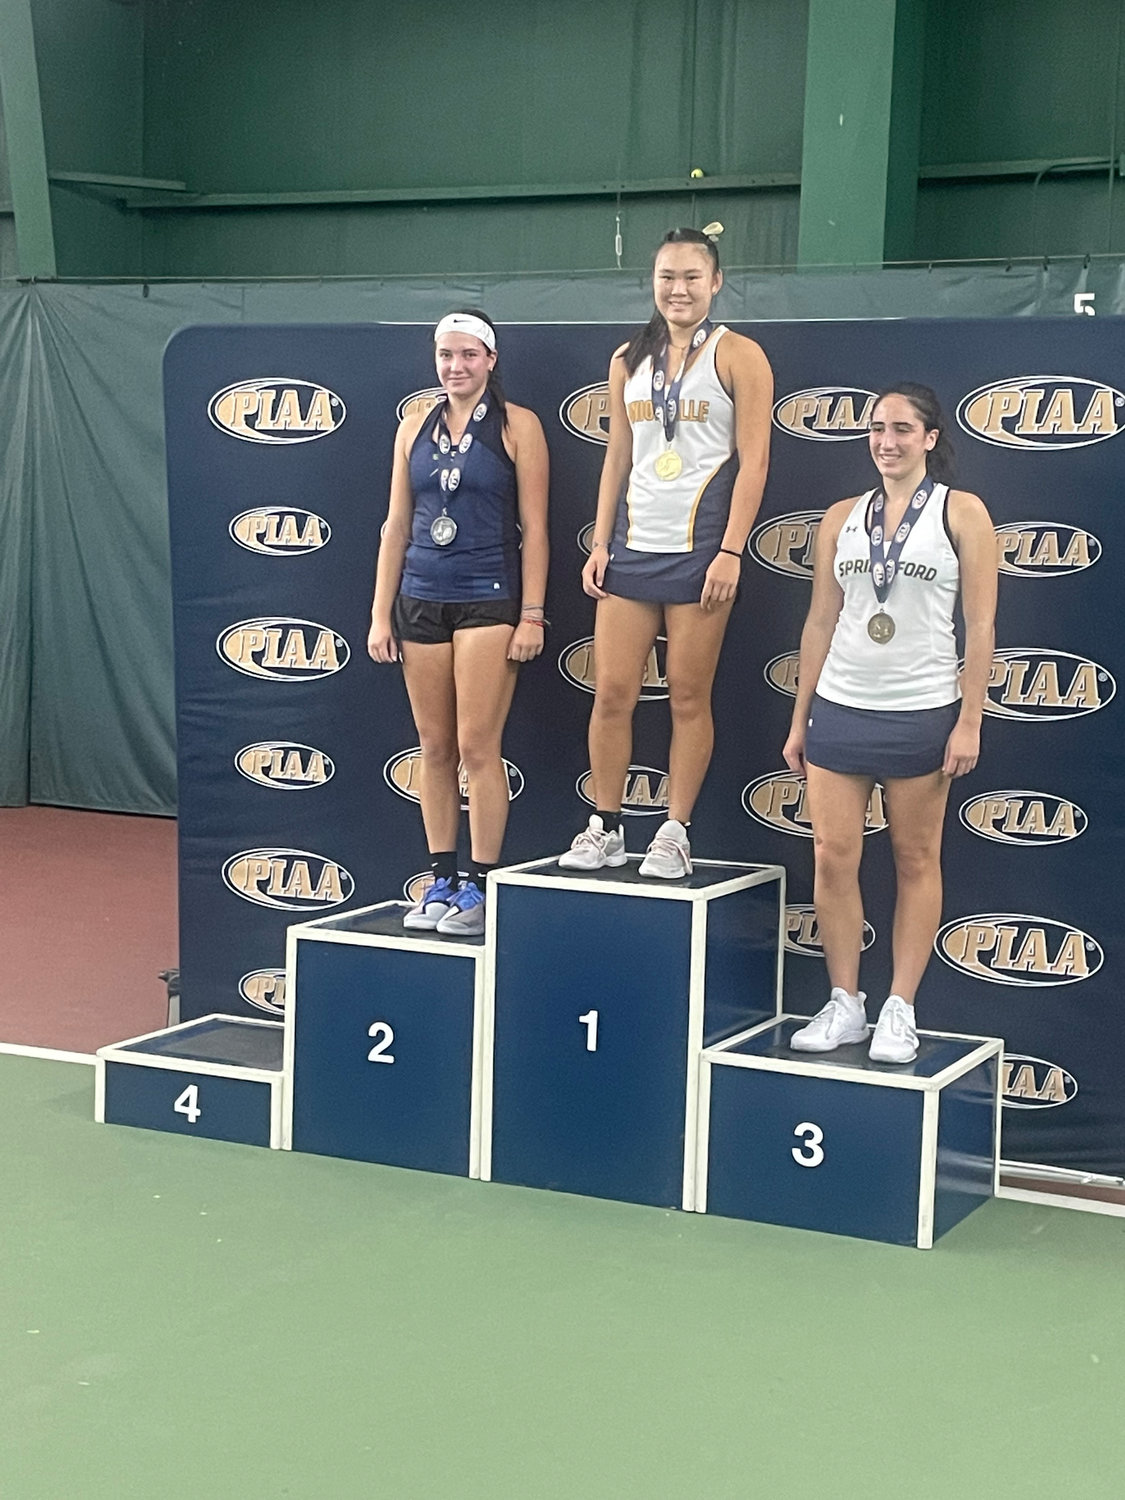 Council Rock South junior Dasha Chichkina, left, earned second-place medals in District One and PIAA Class 3A individual tennis tournaments this fall for the Golden Hawks. Here, she stands on the PIAA podium at Hershey Racquet Club alongside Unionville junior Grace Li, center, and Spring-Ford junior Mia Matriccino, right.